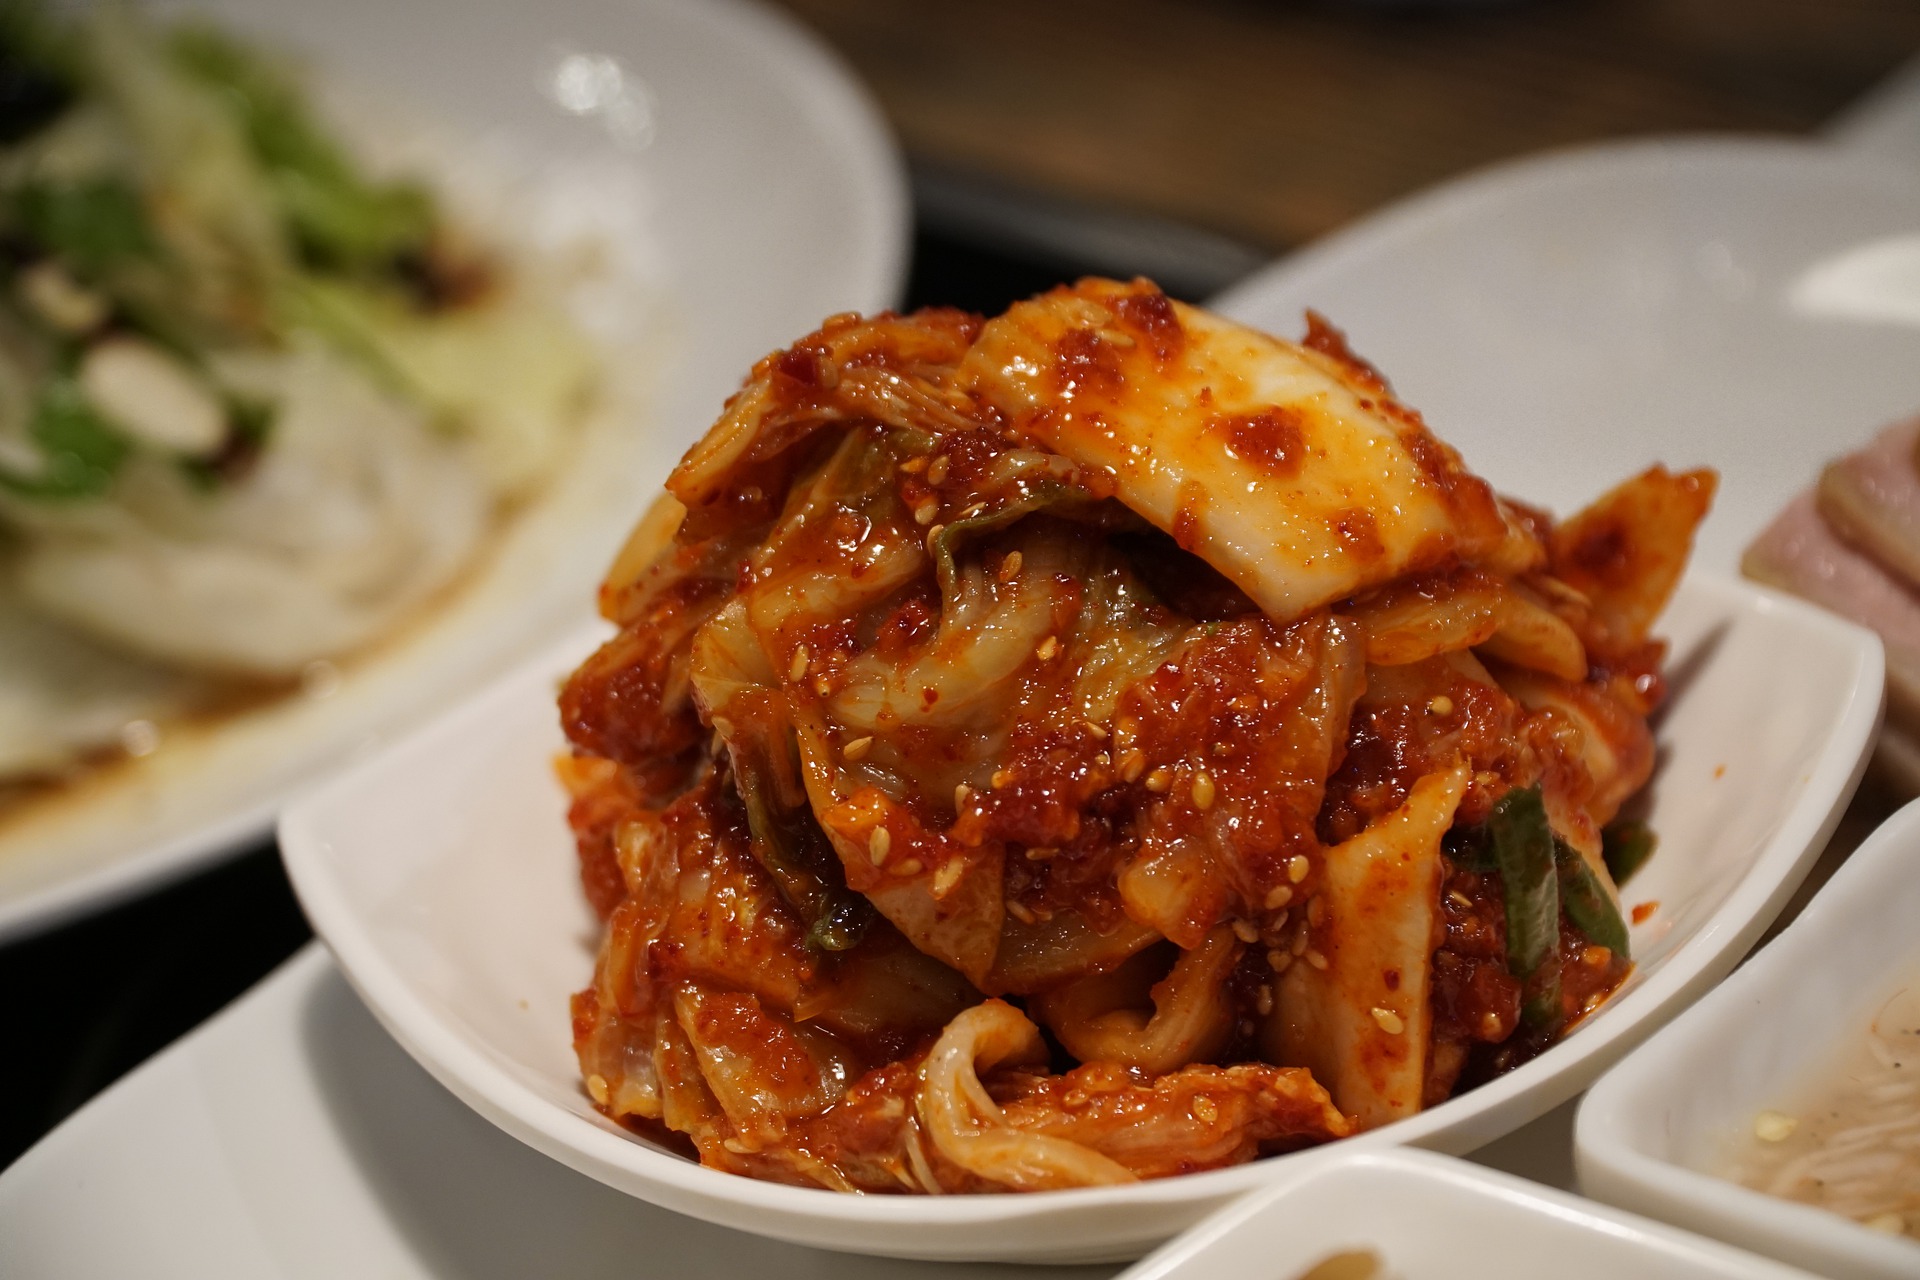 We finally know which bacteria give kimchi its power